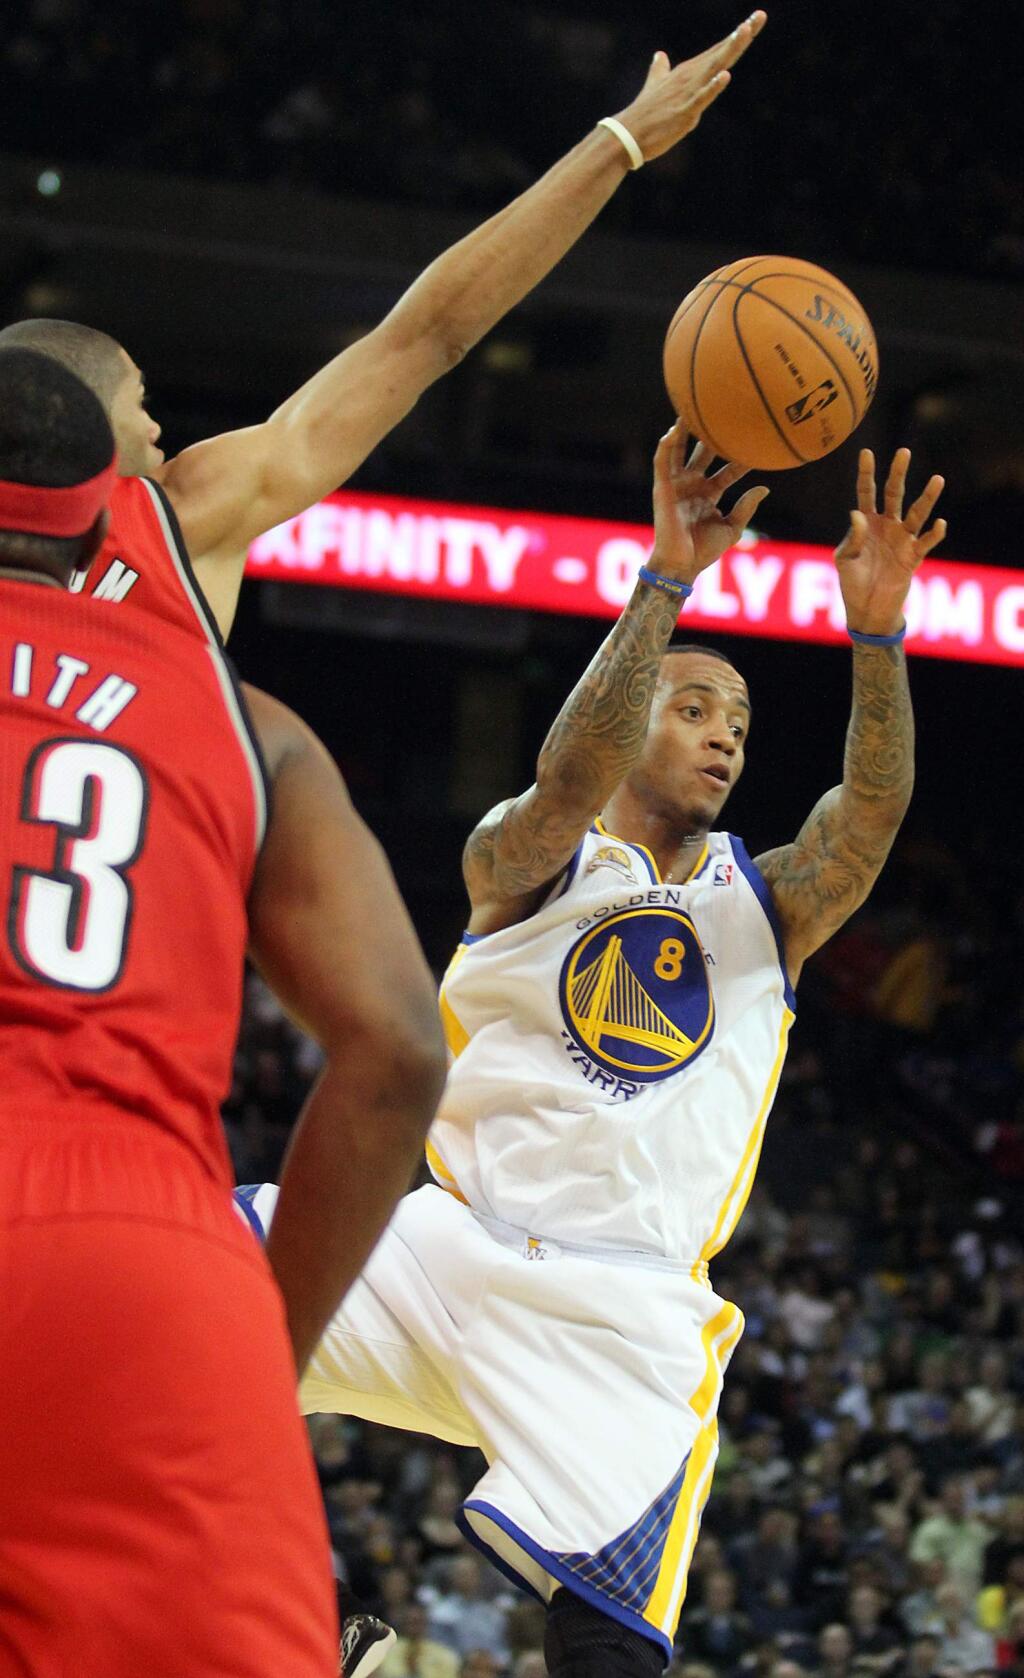 Golden State Warriors shooting guard Monta Ellis dishes off a pass against the Portland Trail Blazers during their game in Oakland on Wednesday night, January 25, 2012. (Christopher Chung/ The Press Democrat)